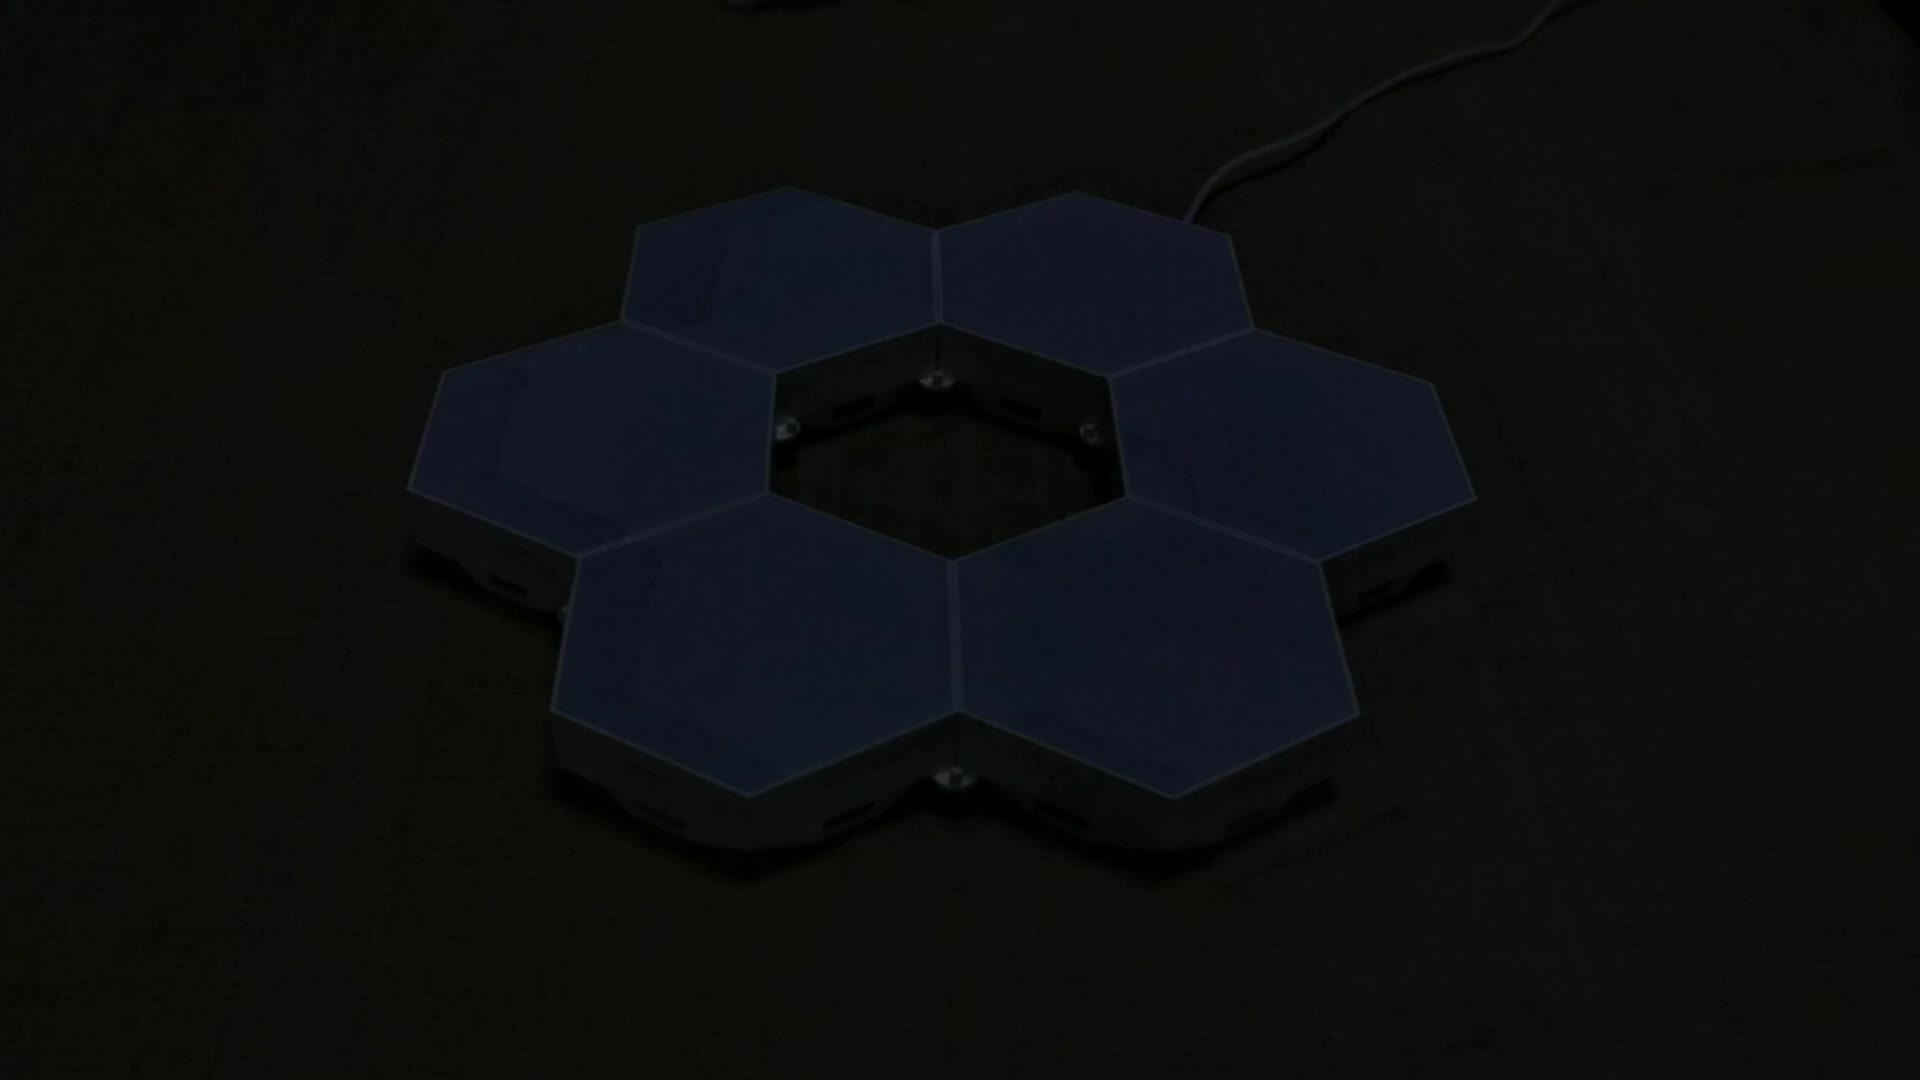 6pcs LED Hexagon Lights Remote Controlled, RGB LED Wall Lights Touch  Sensitive Hexagon Light Panels For Wall Gaming LED Lights For Gaming Setup,  6 Geo